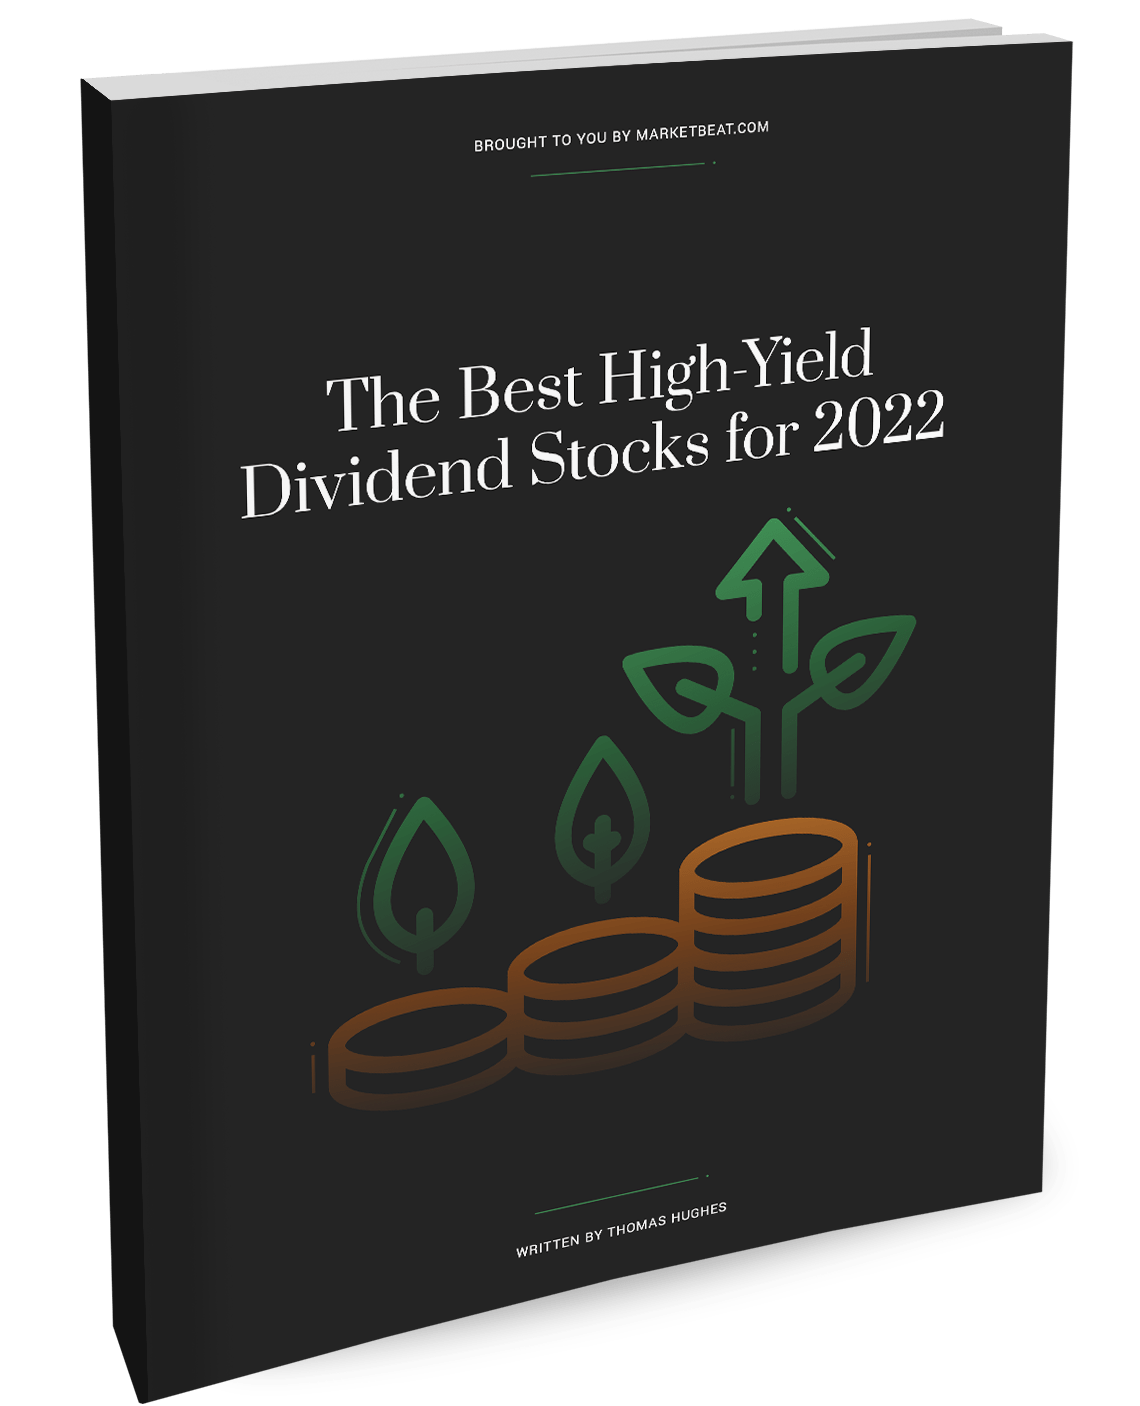 The Best High Yield Dividend Stocks in 2022